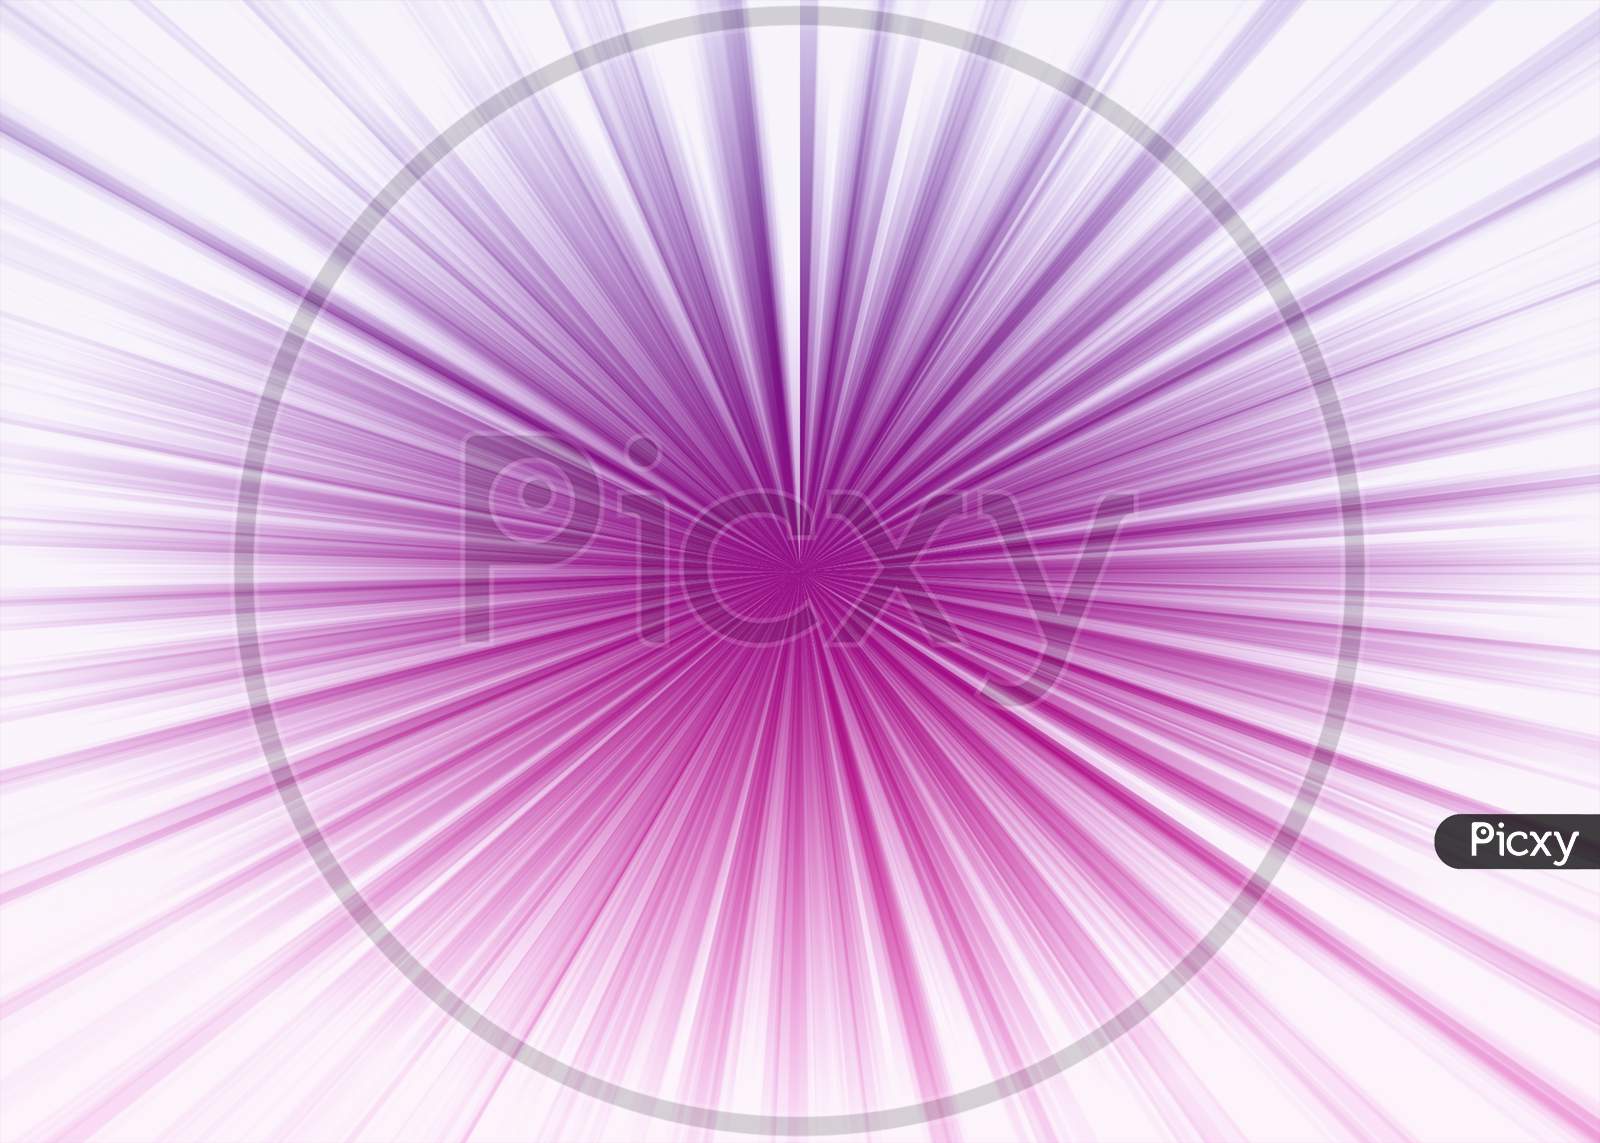 Purple Color Sun Burst On The White Background And Beautiful Design.